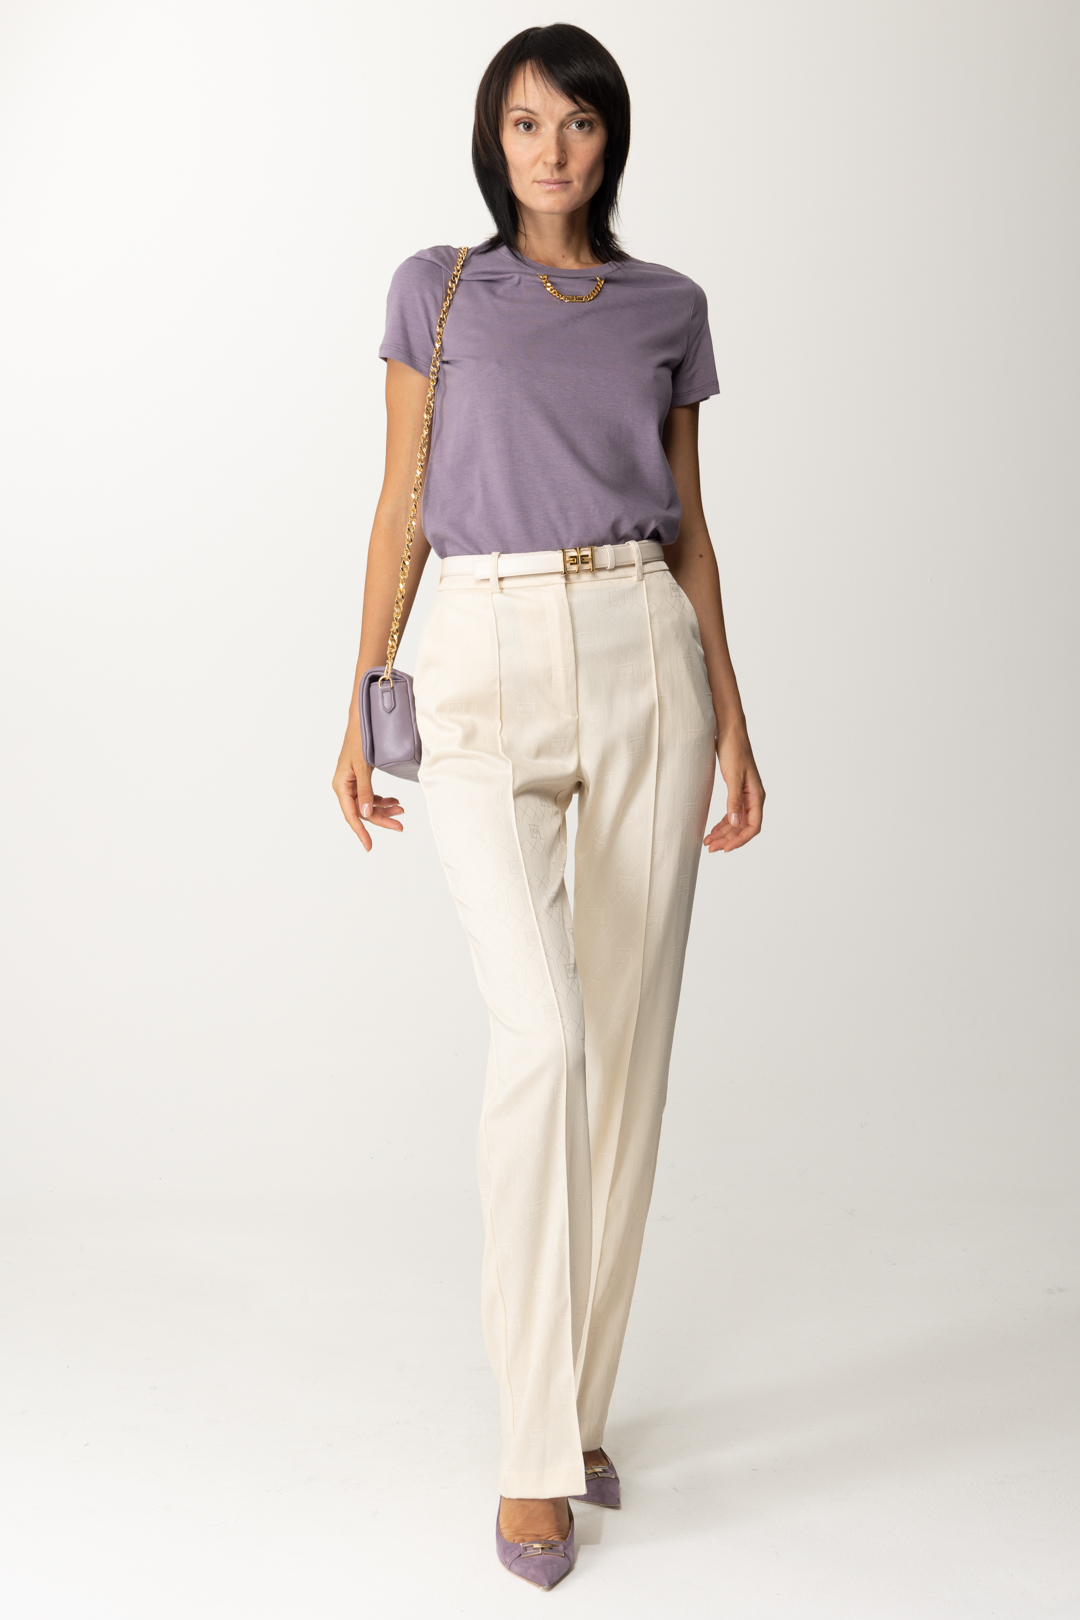 Preview: Elisabetta Franchi T-shirt with chain CANDY VIOLET